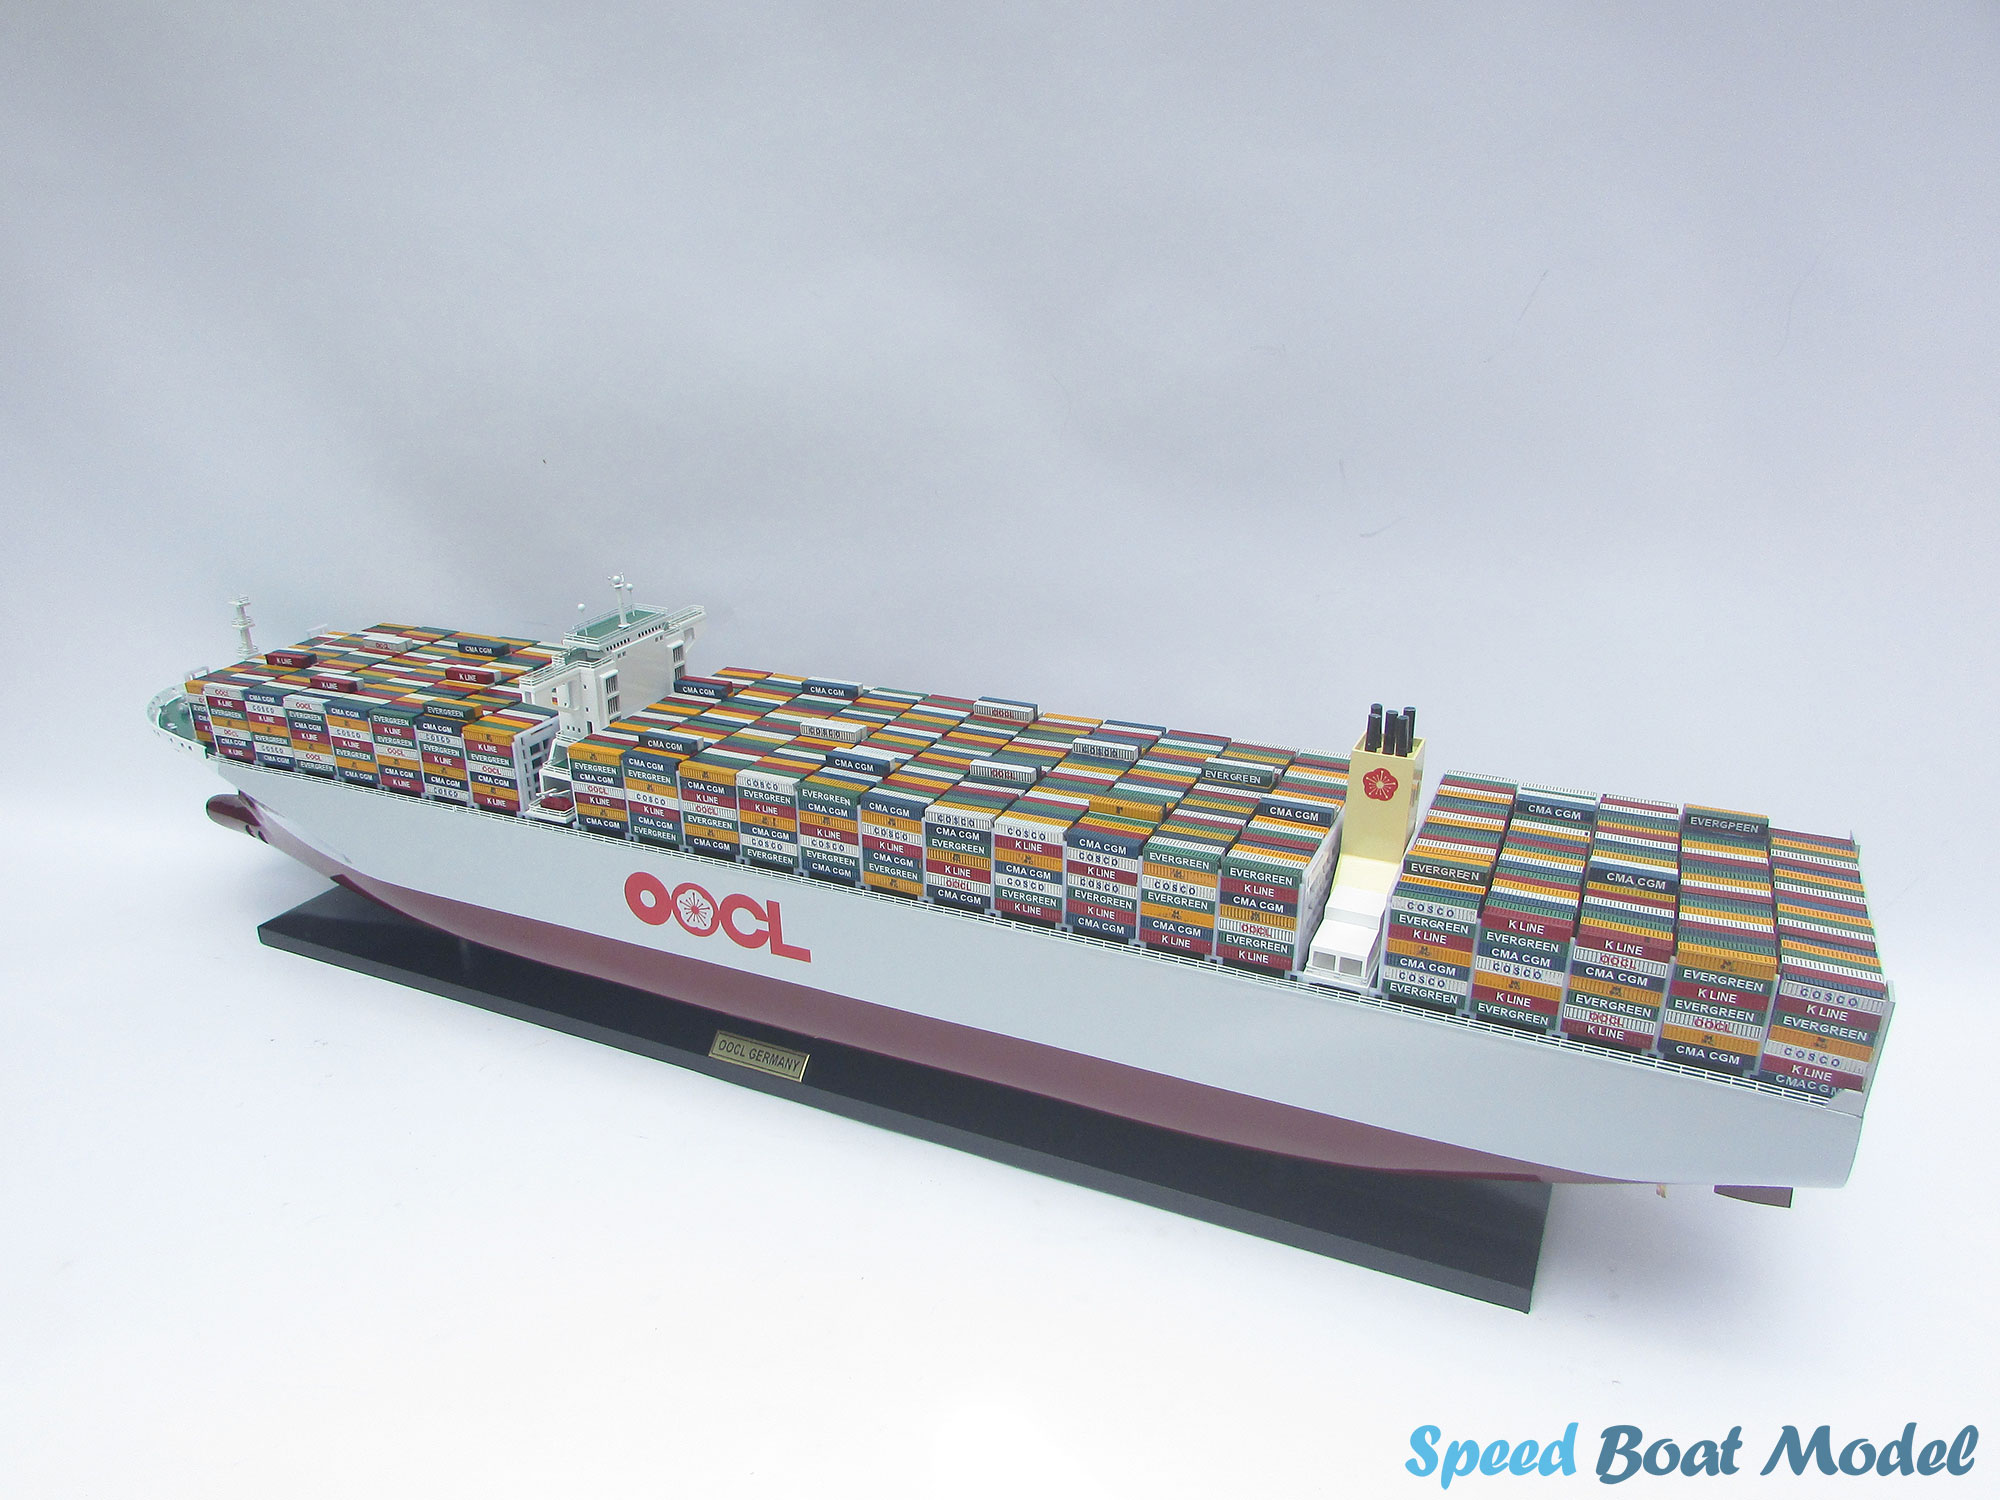 Oocl Germany Commercial Ship Model 39.3"